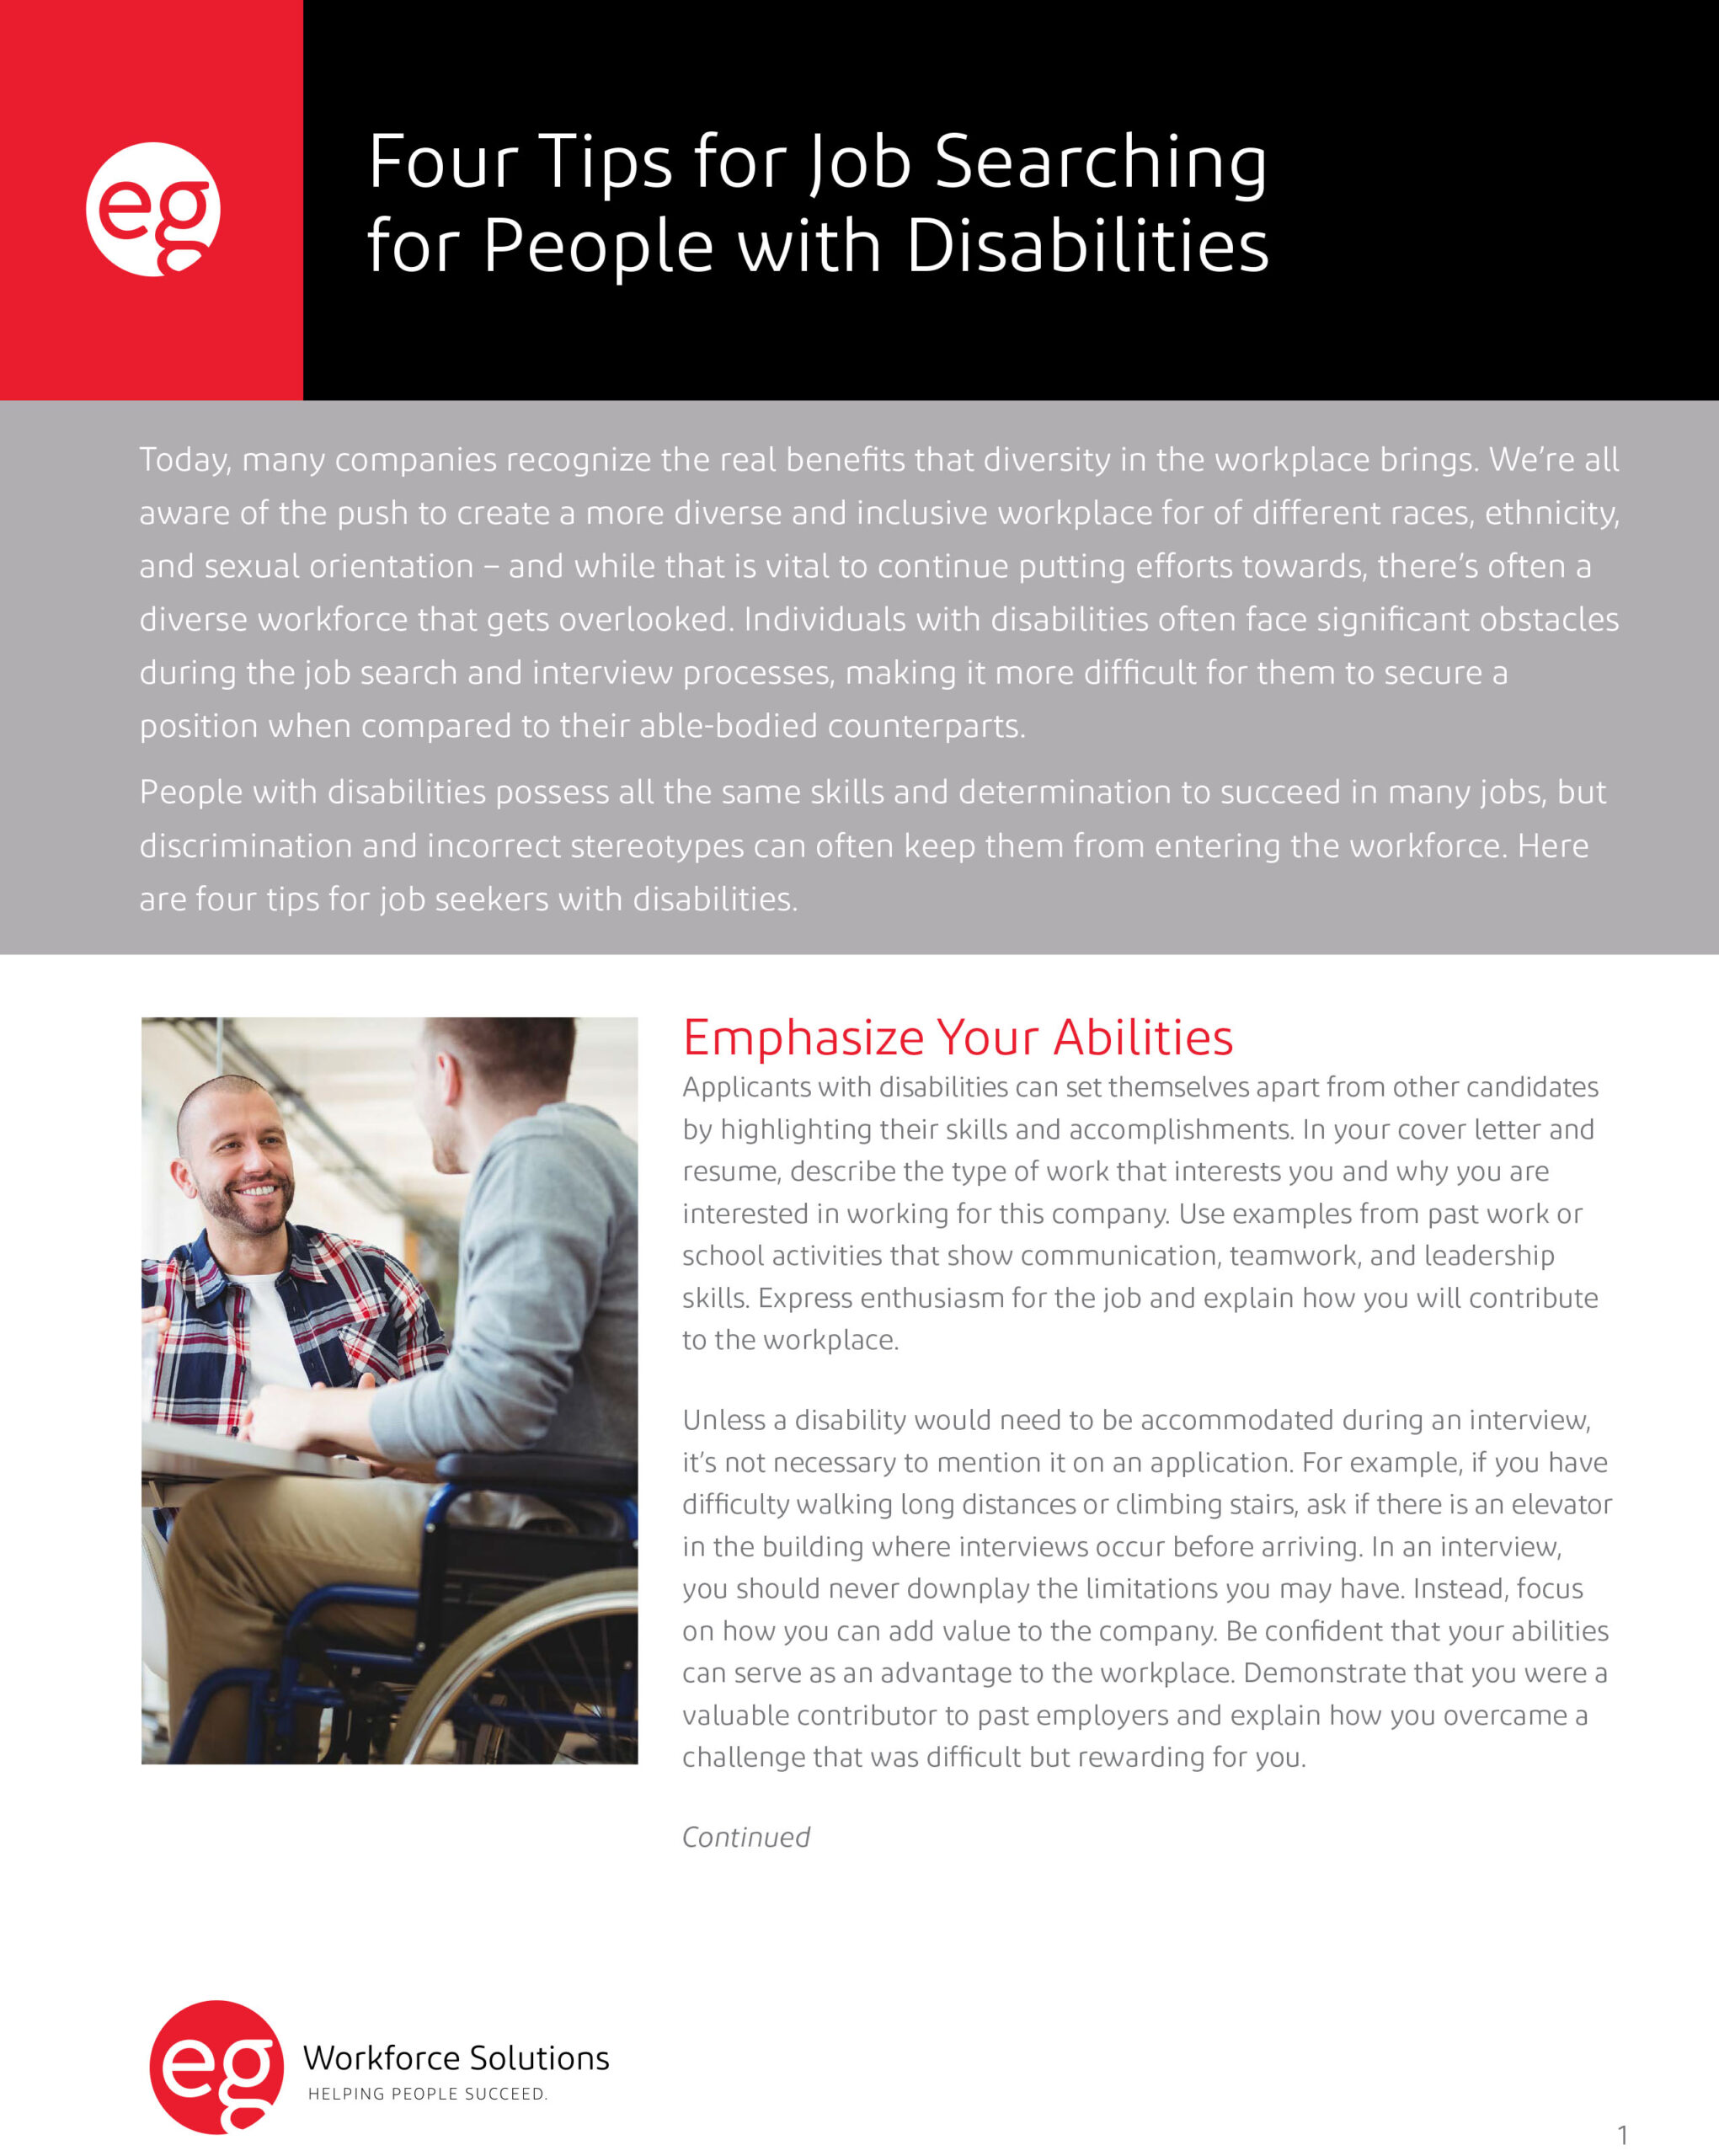 Four Tips for Job Searching for People with Disabilities